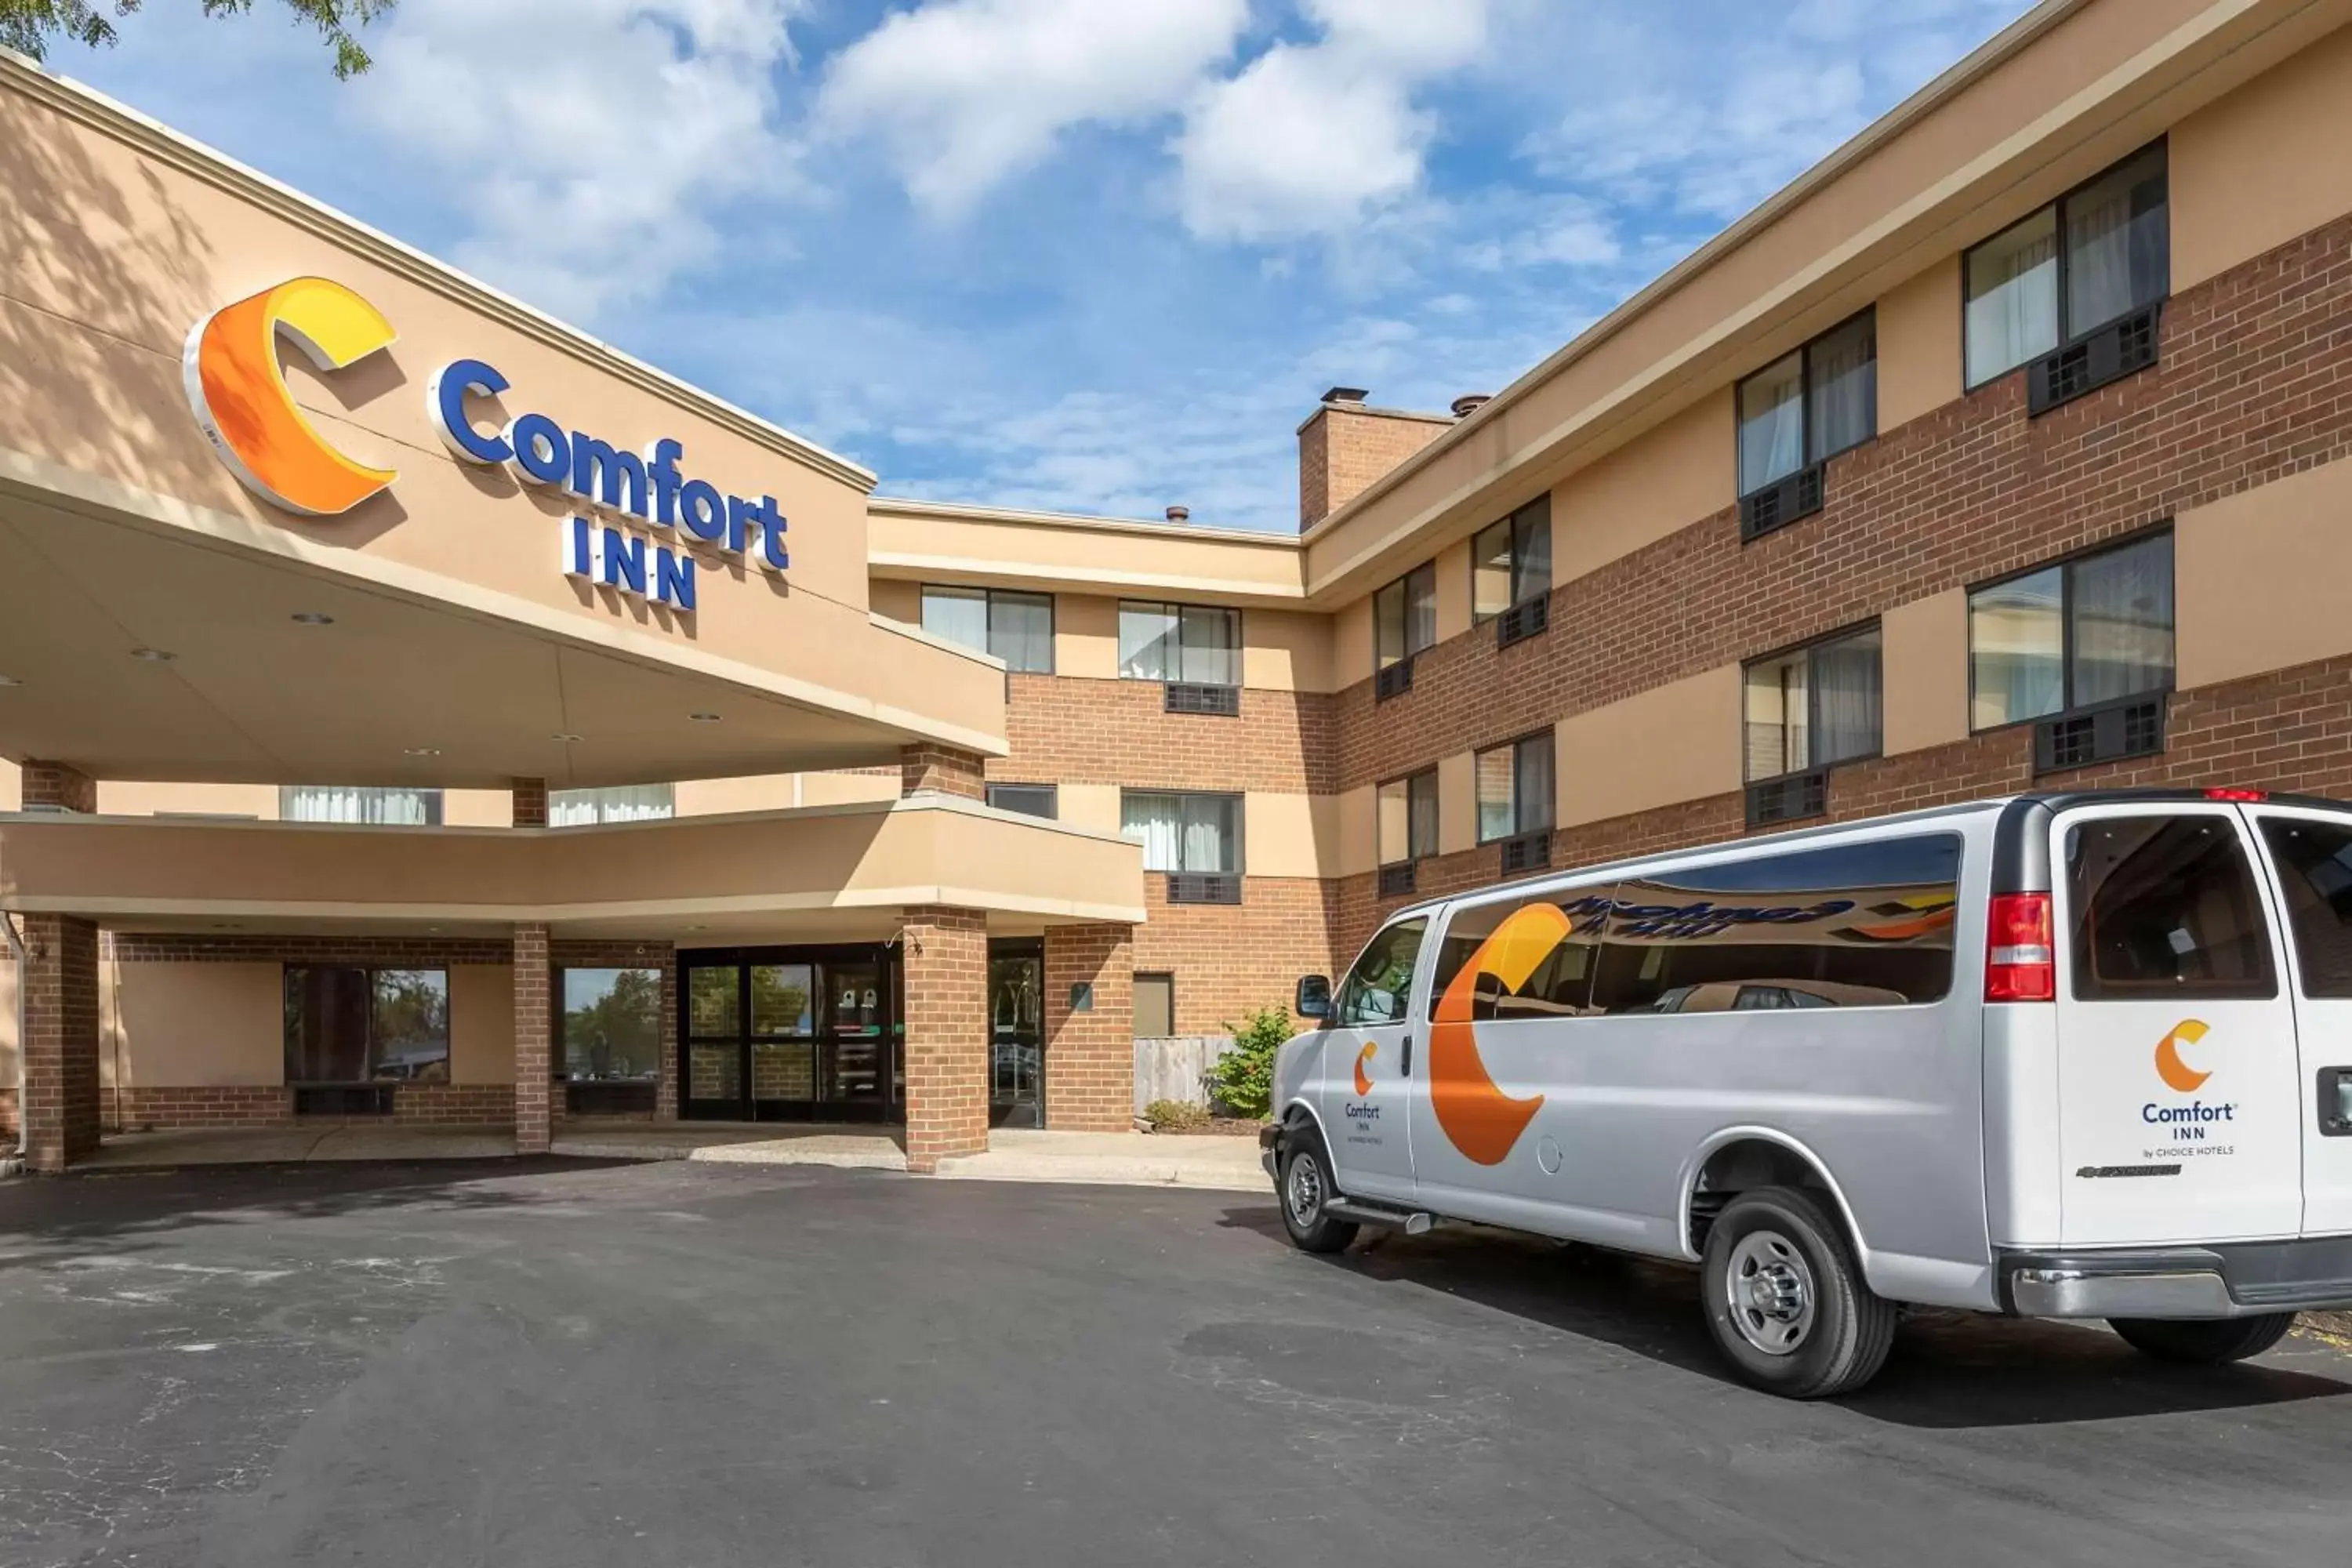 On site, Property Building in Comfort Inn Grand Rapids Airport